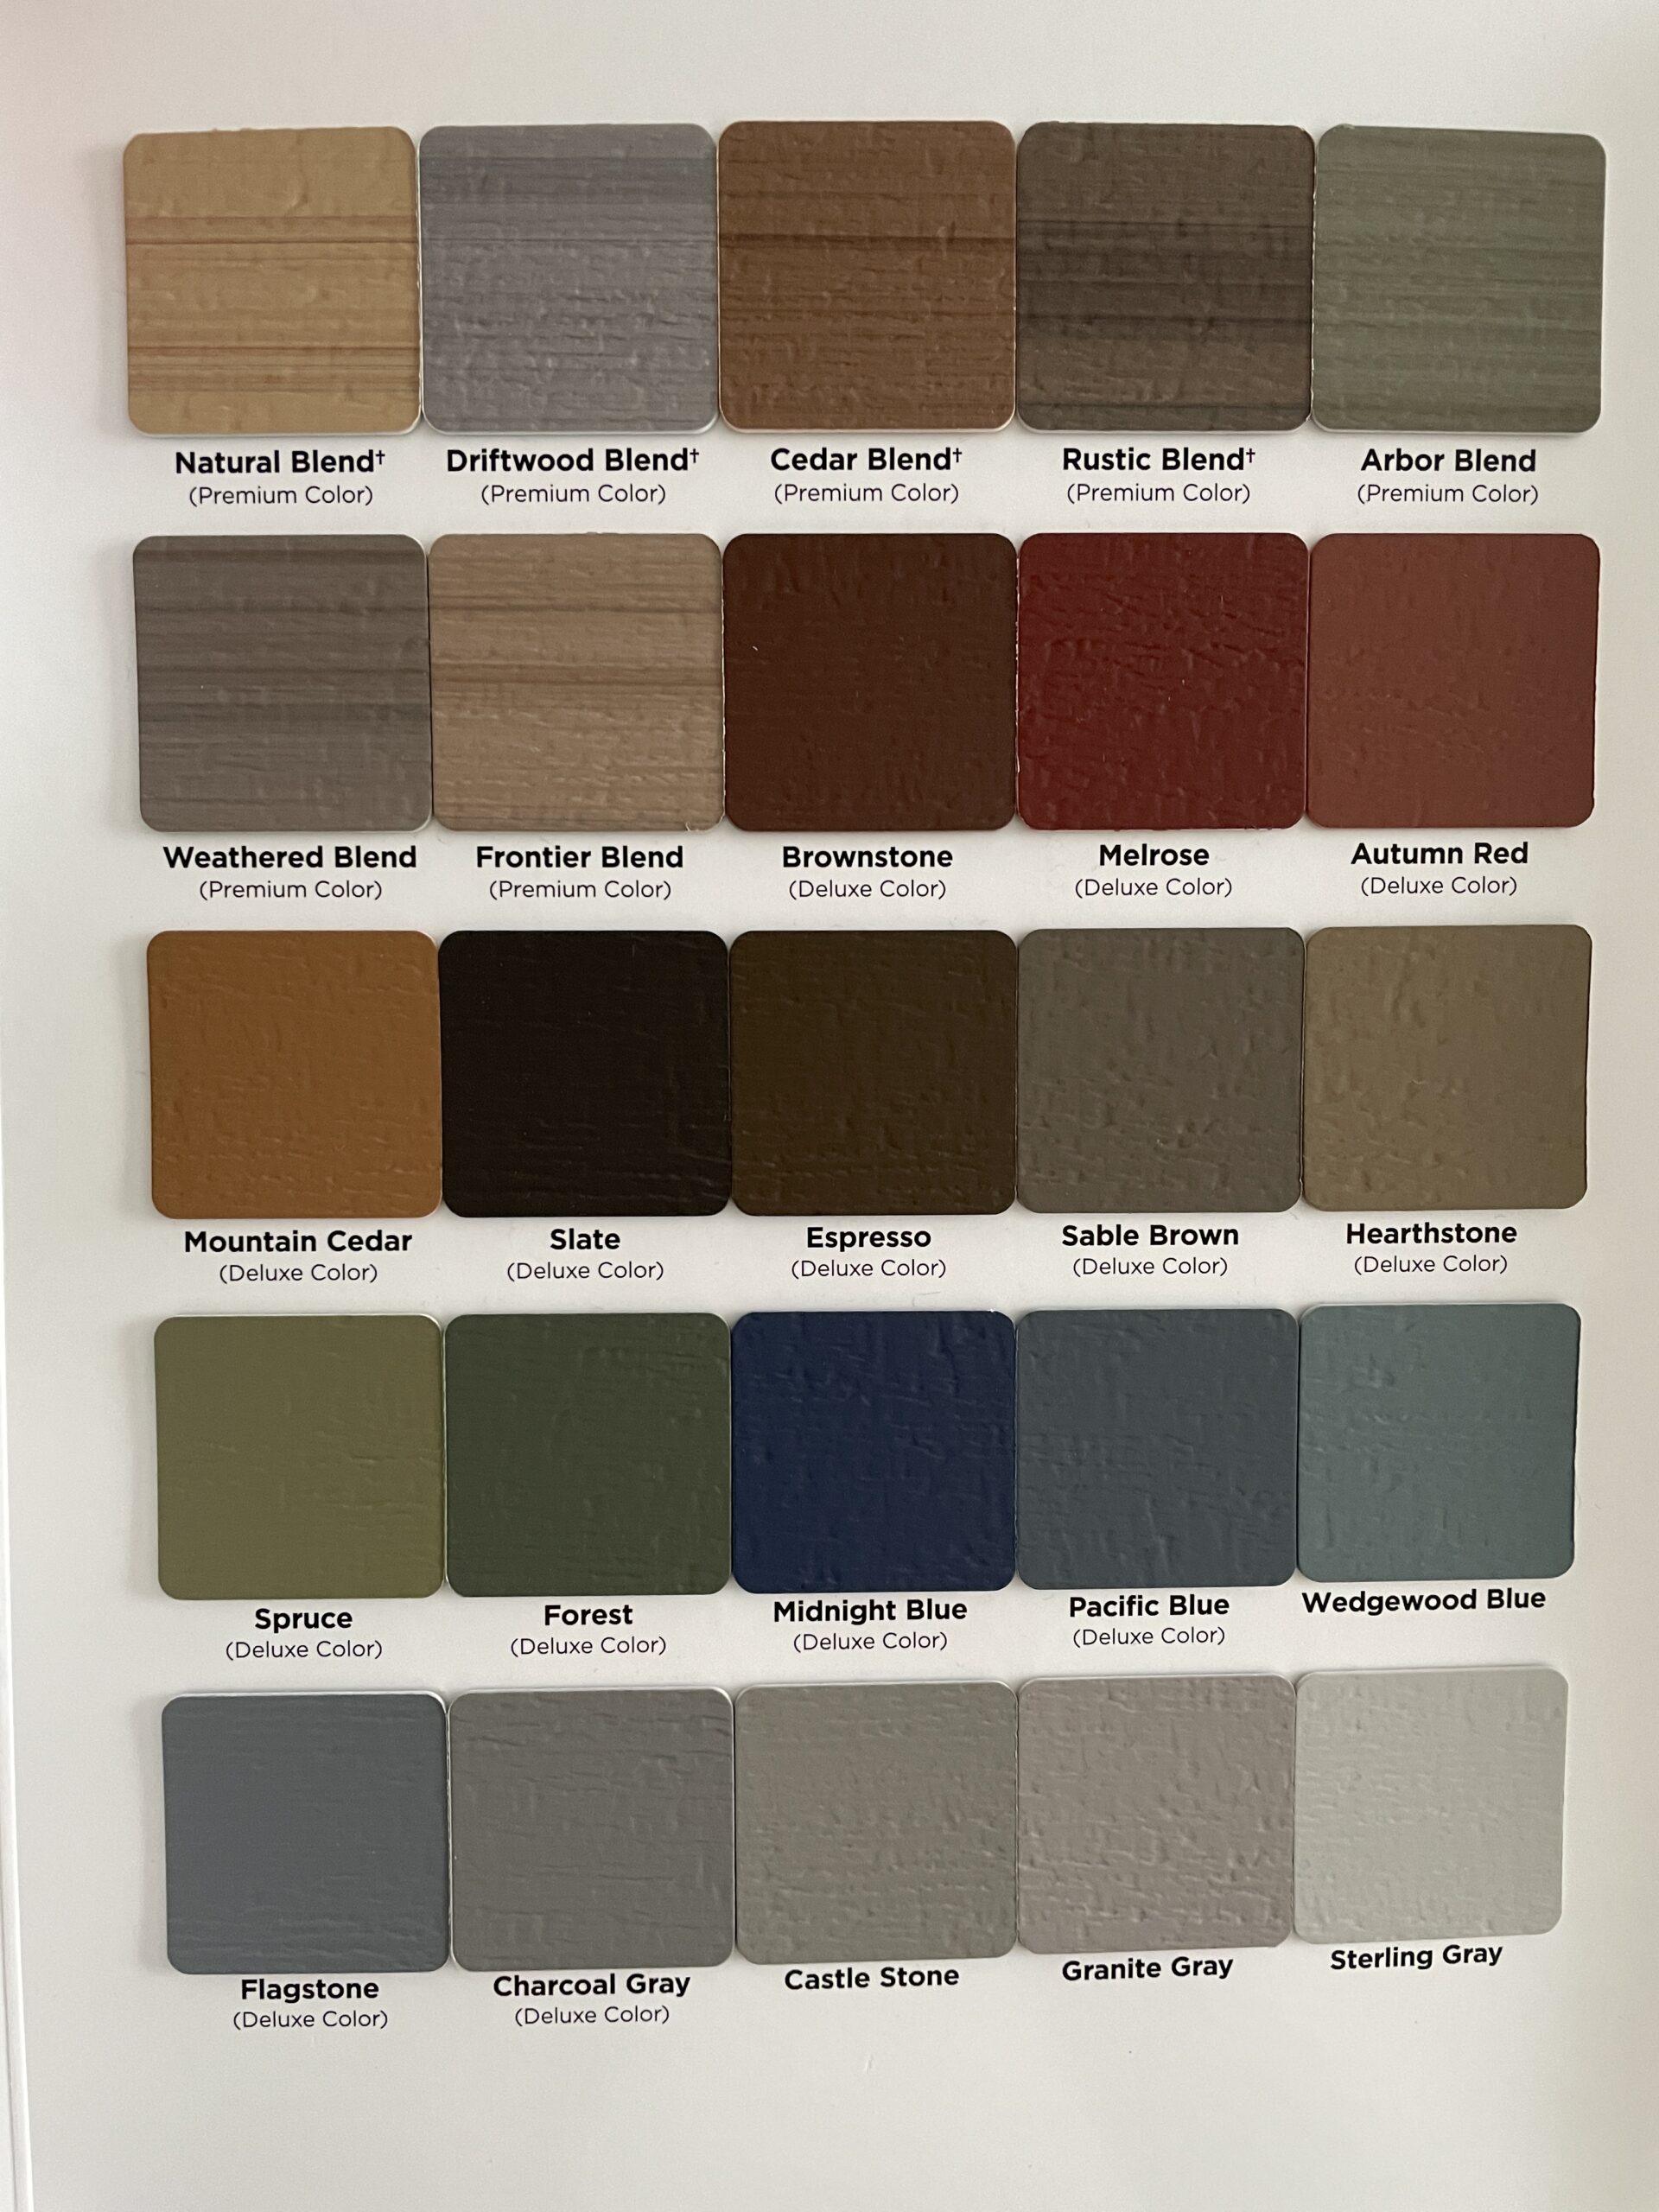 Various siding color options Certainteed for vinyl fiber cement and wood